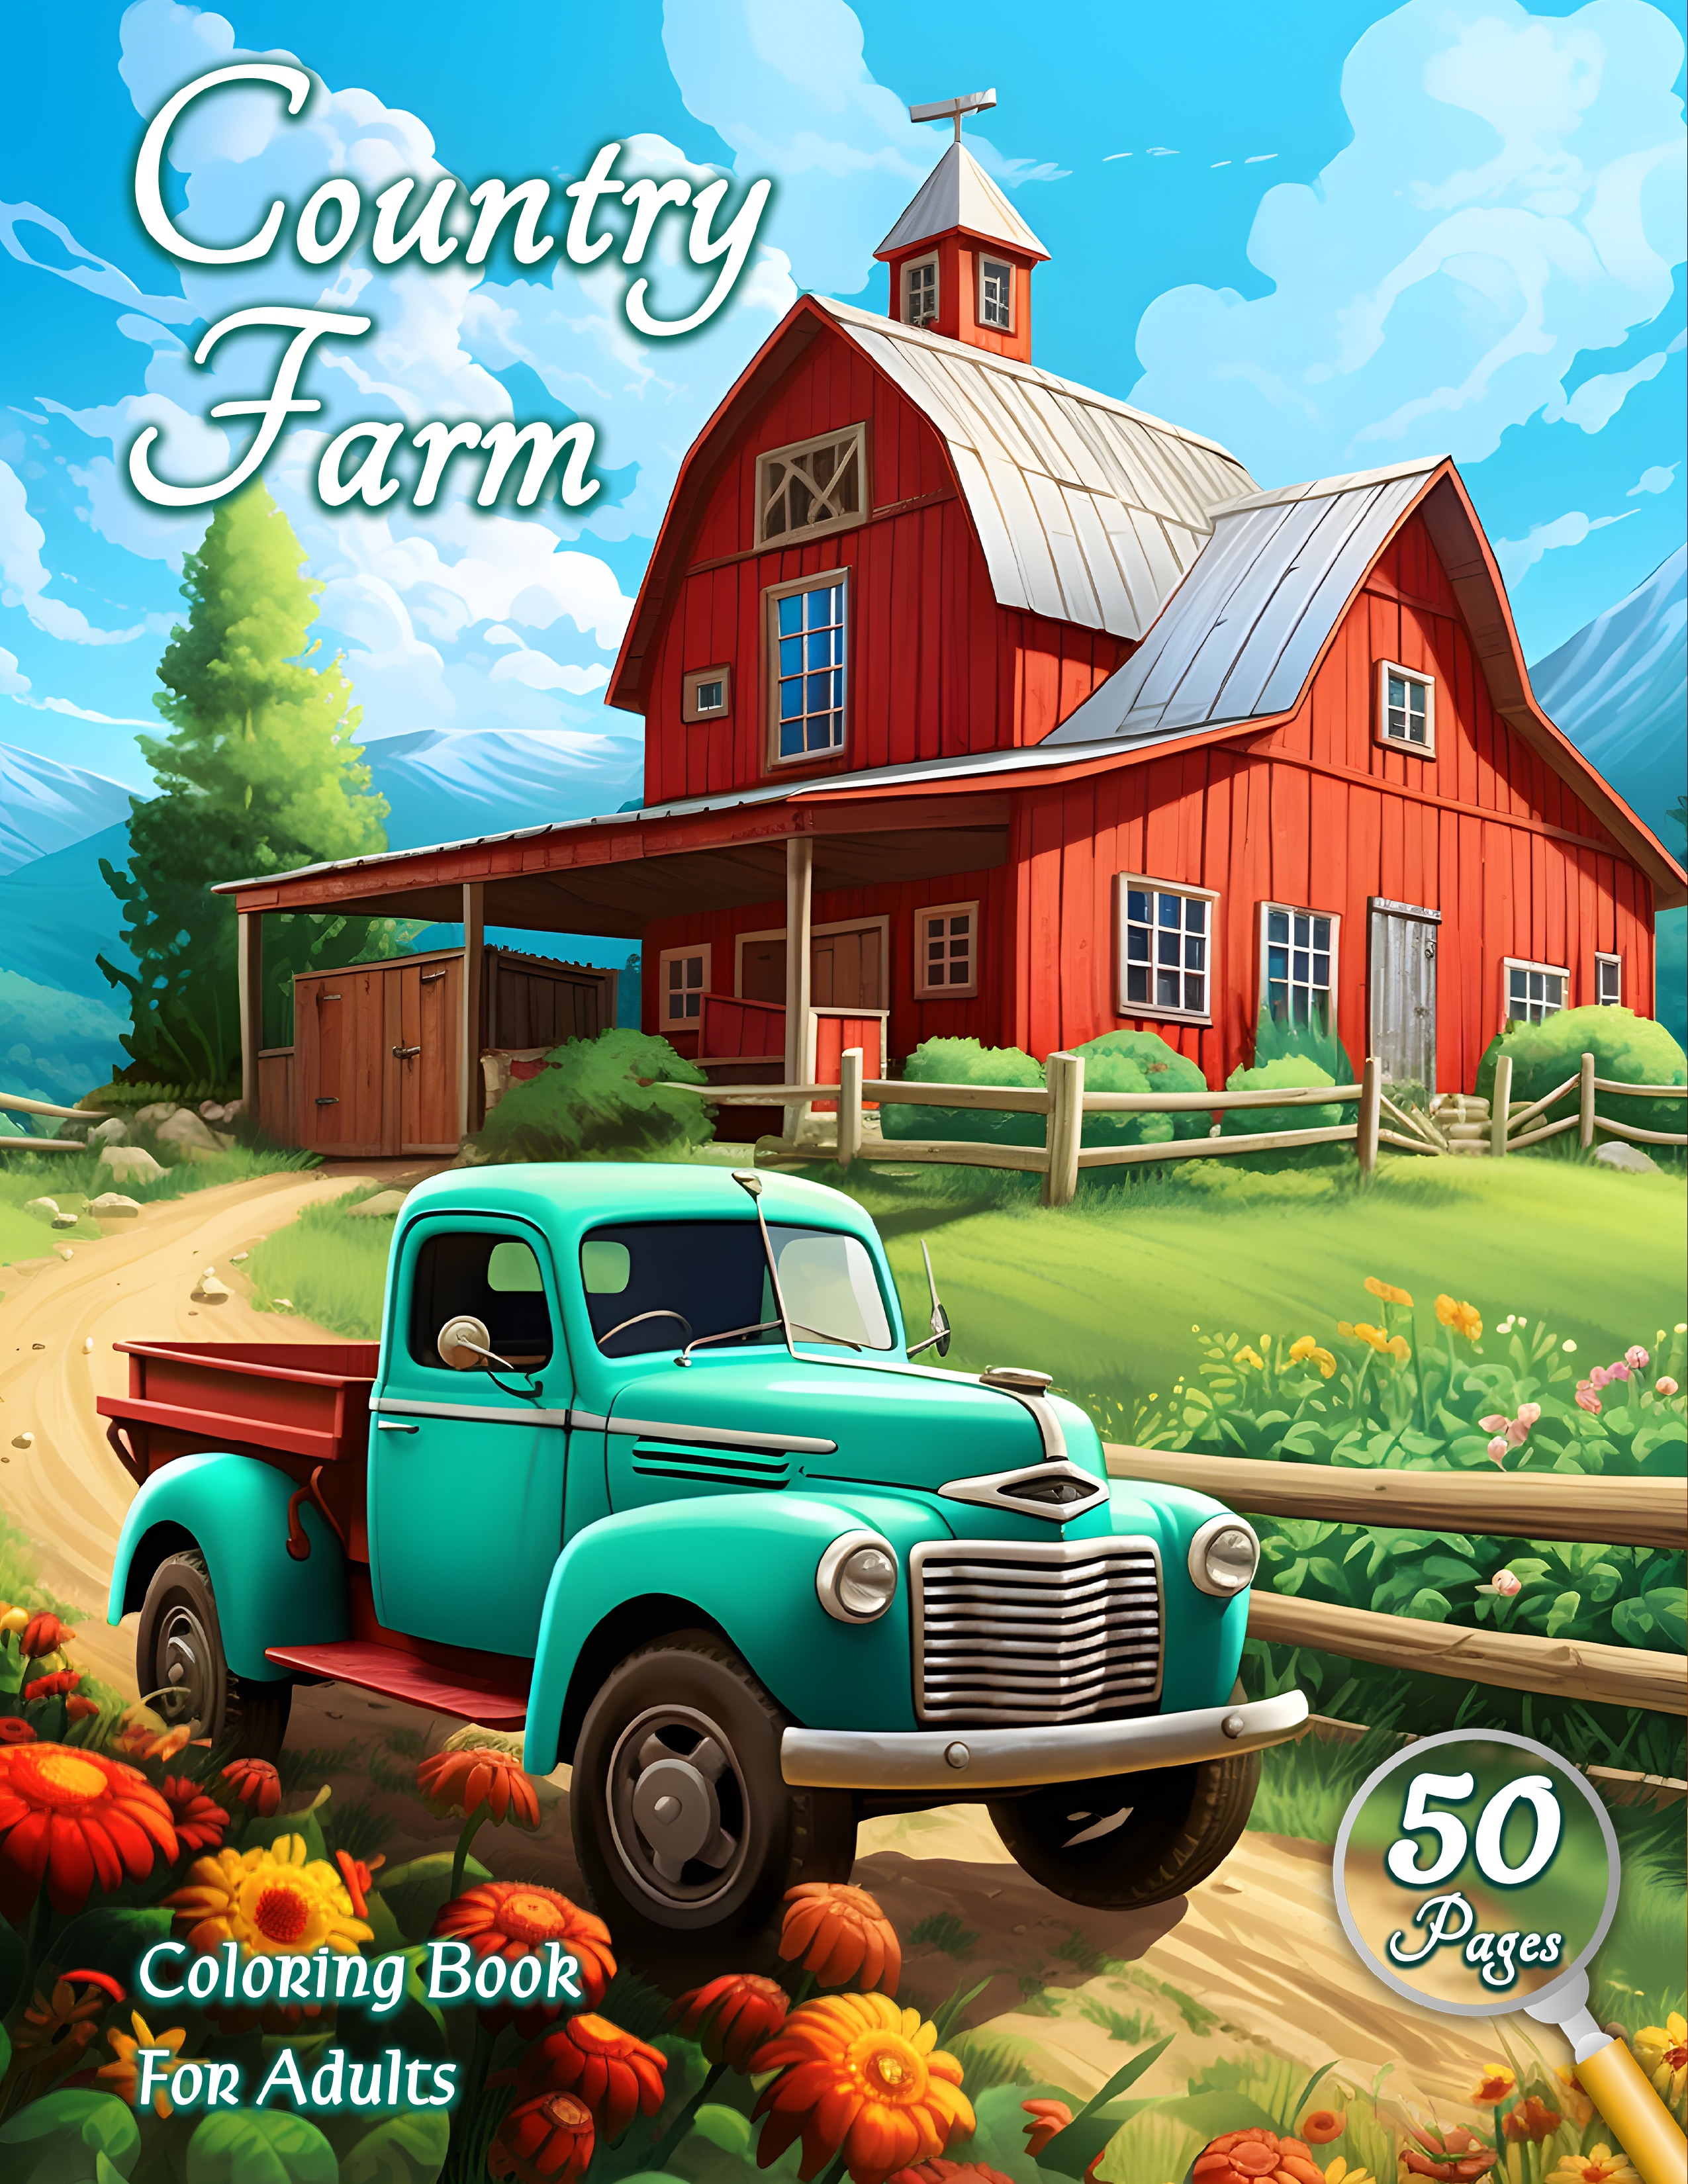 ountry Farm Coloring Book for Adults: Escape to a Charming World of Farm House Living, Rural Countrysides, Rustic Barns, and Garden Scenes, Perfect for Adult Relaxation and Stress Relief